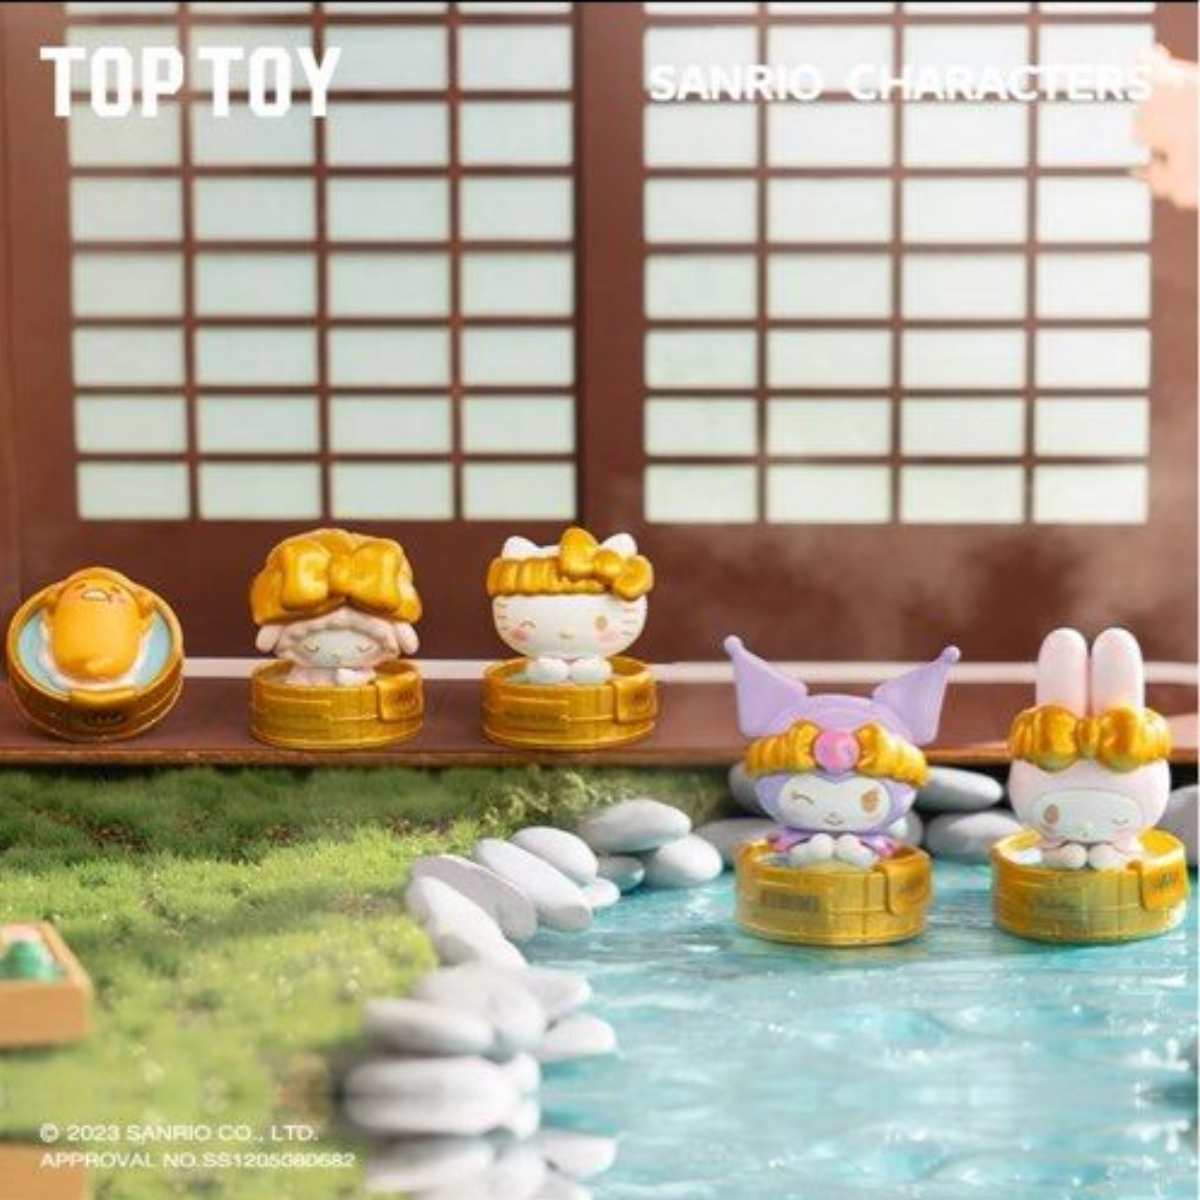 TopToy x Sanrio Characters Mini Cuteness Spa Series-Single Box (Random)-TopToy-Ace Cards &amp; Collectibles